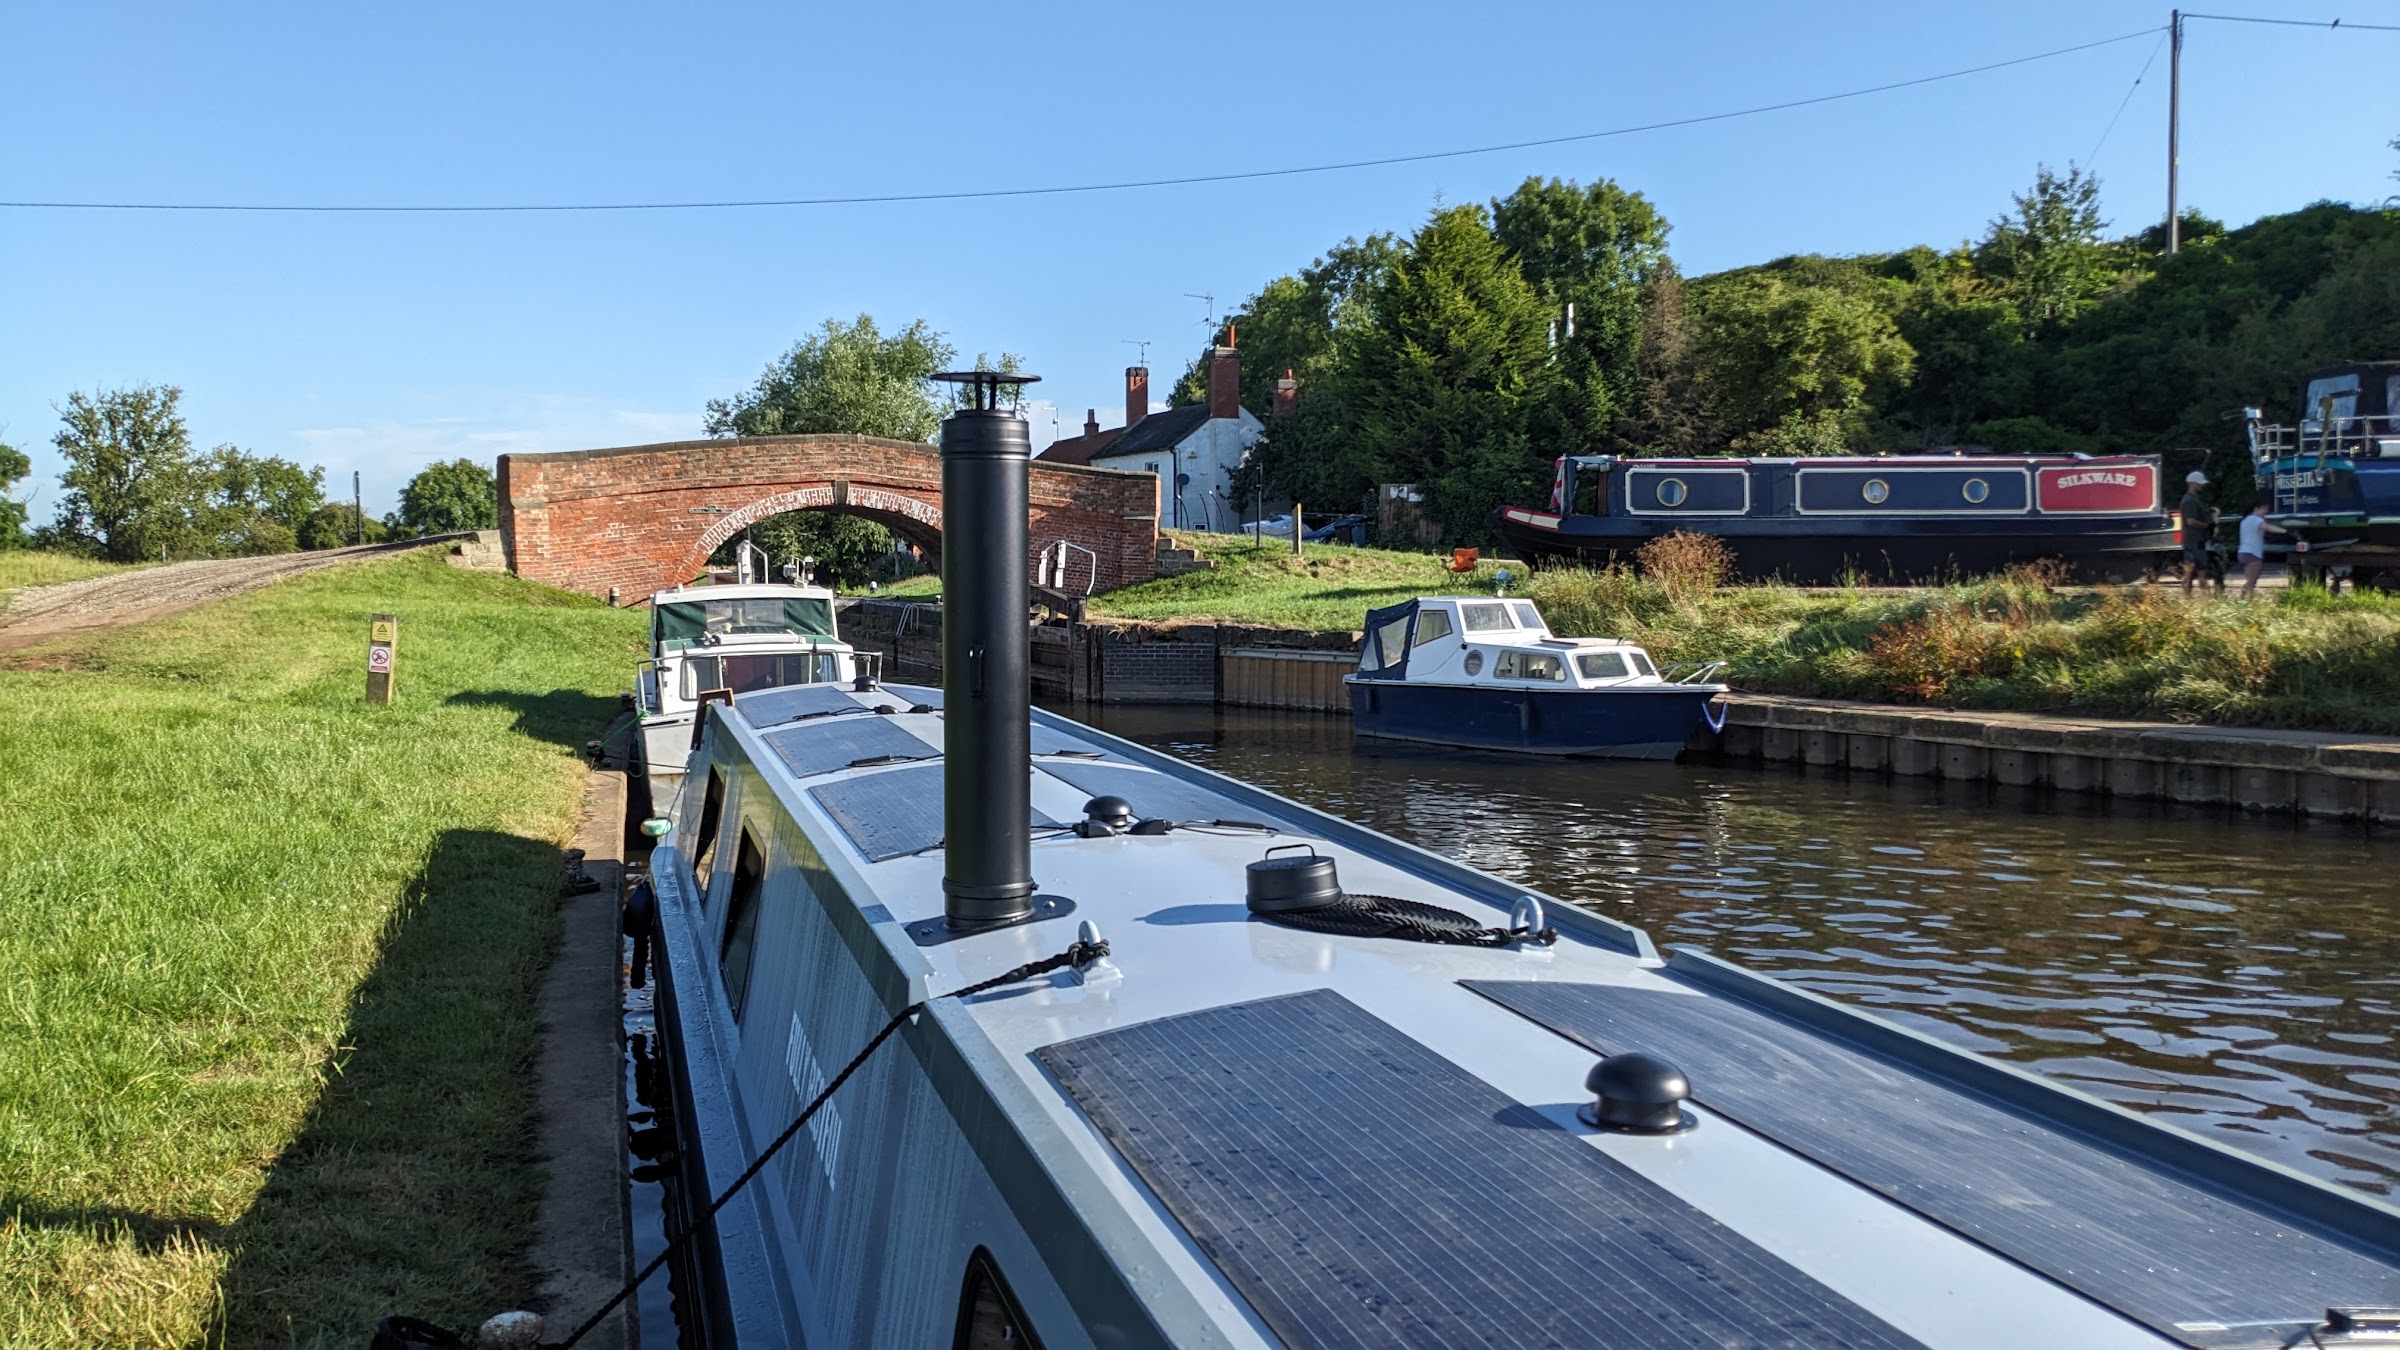 The chimney fitted to the roof of the narrowboat, at Redhill Marina